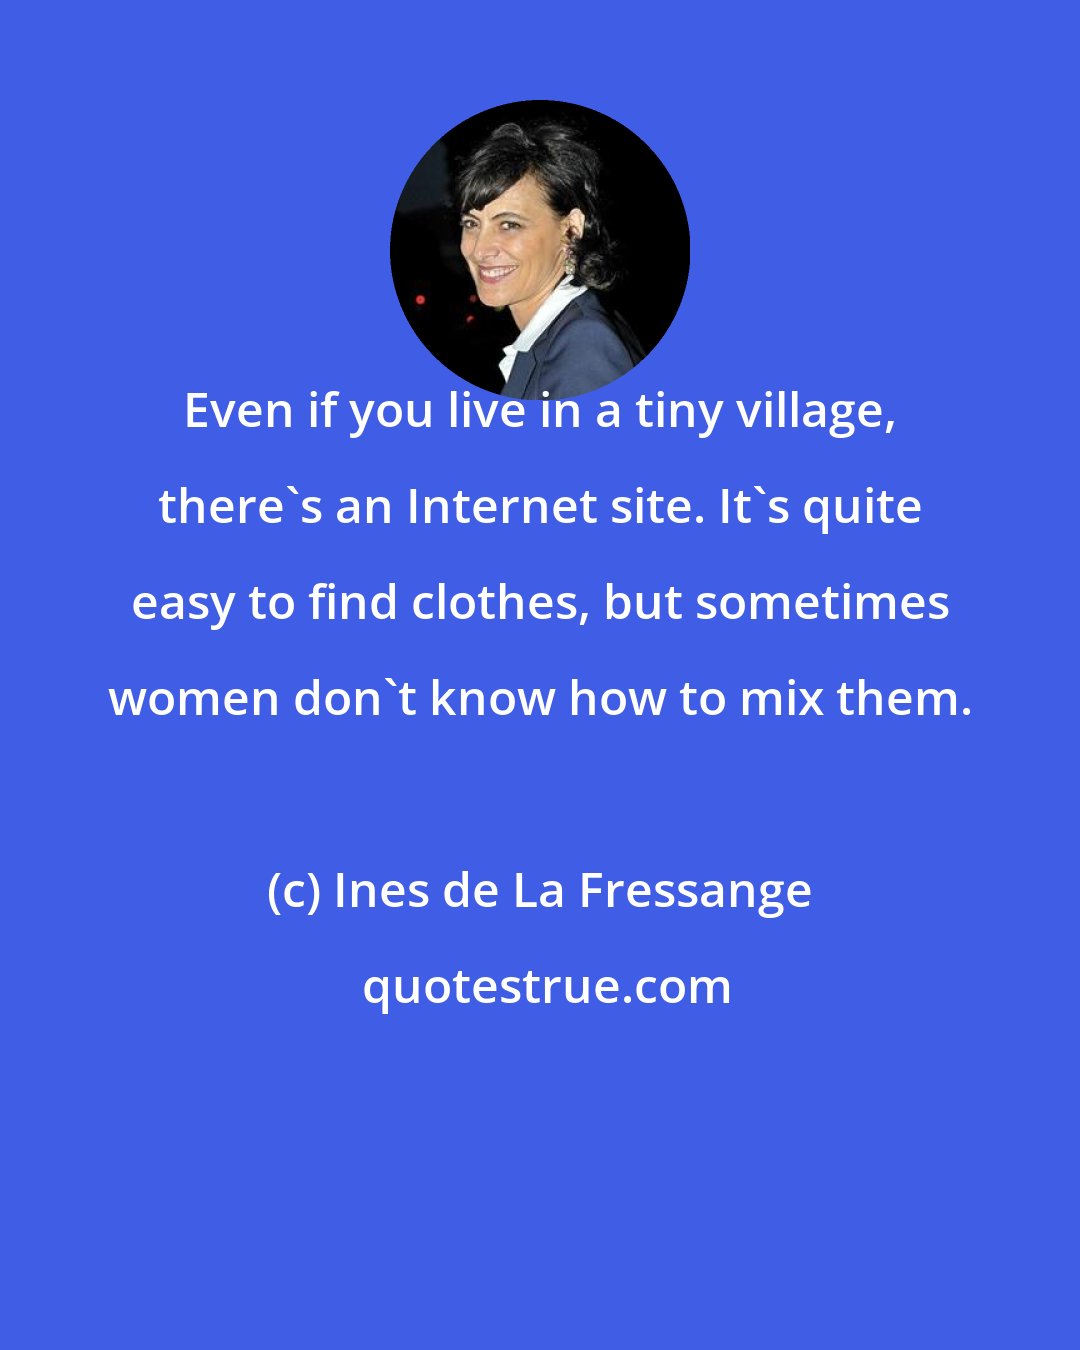 Ines de La Fressange: Even if you live in a tiny village, there's an Internet site. It's quite easy to find clothes, but sometimes women don't know how to mix them.